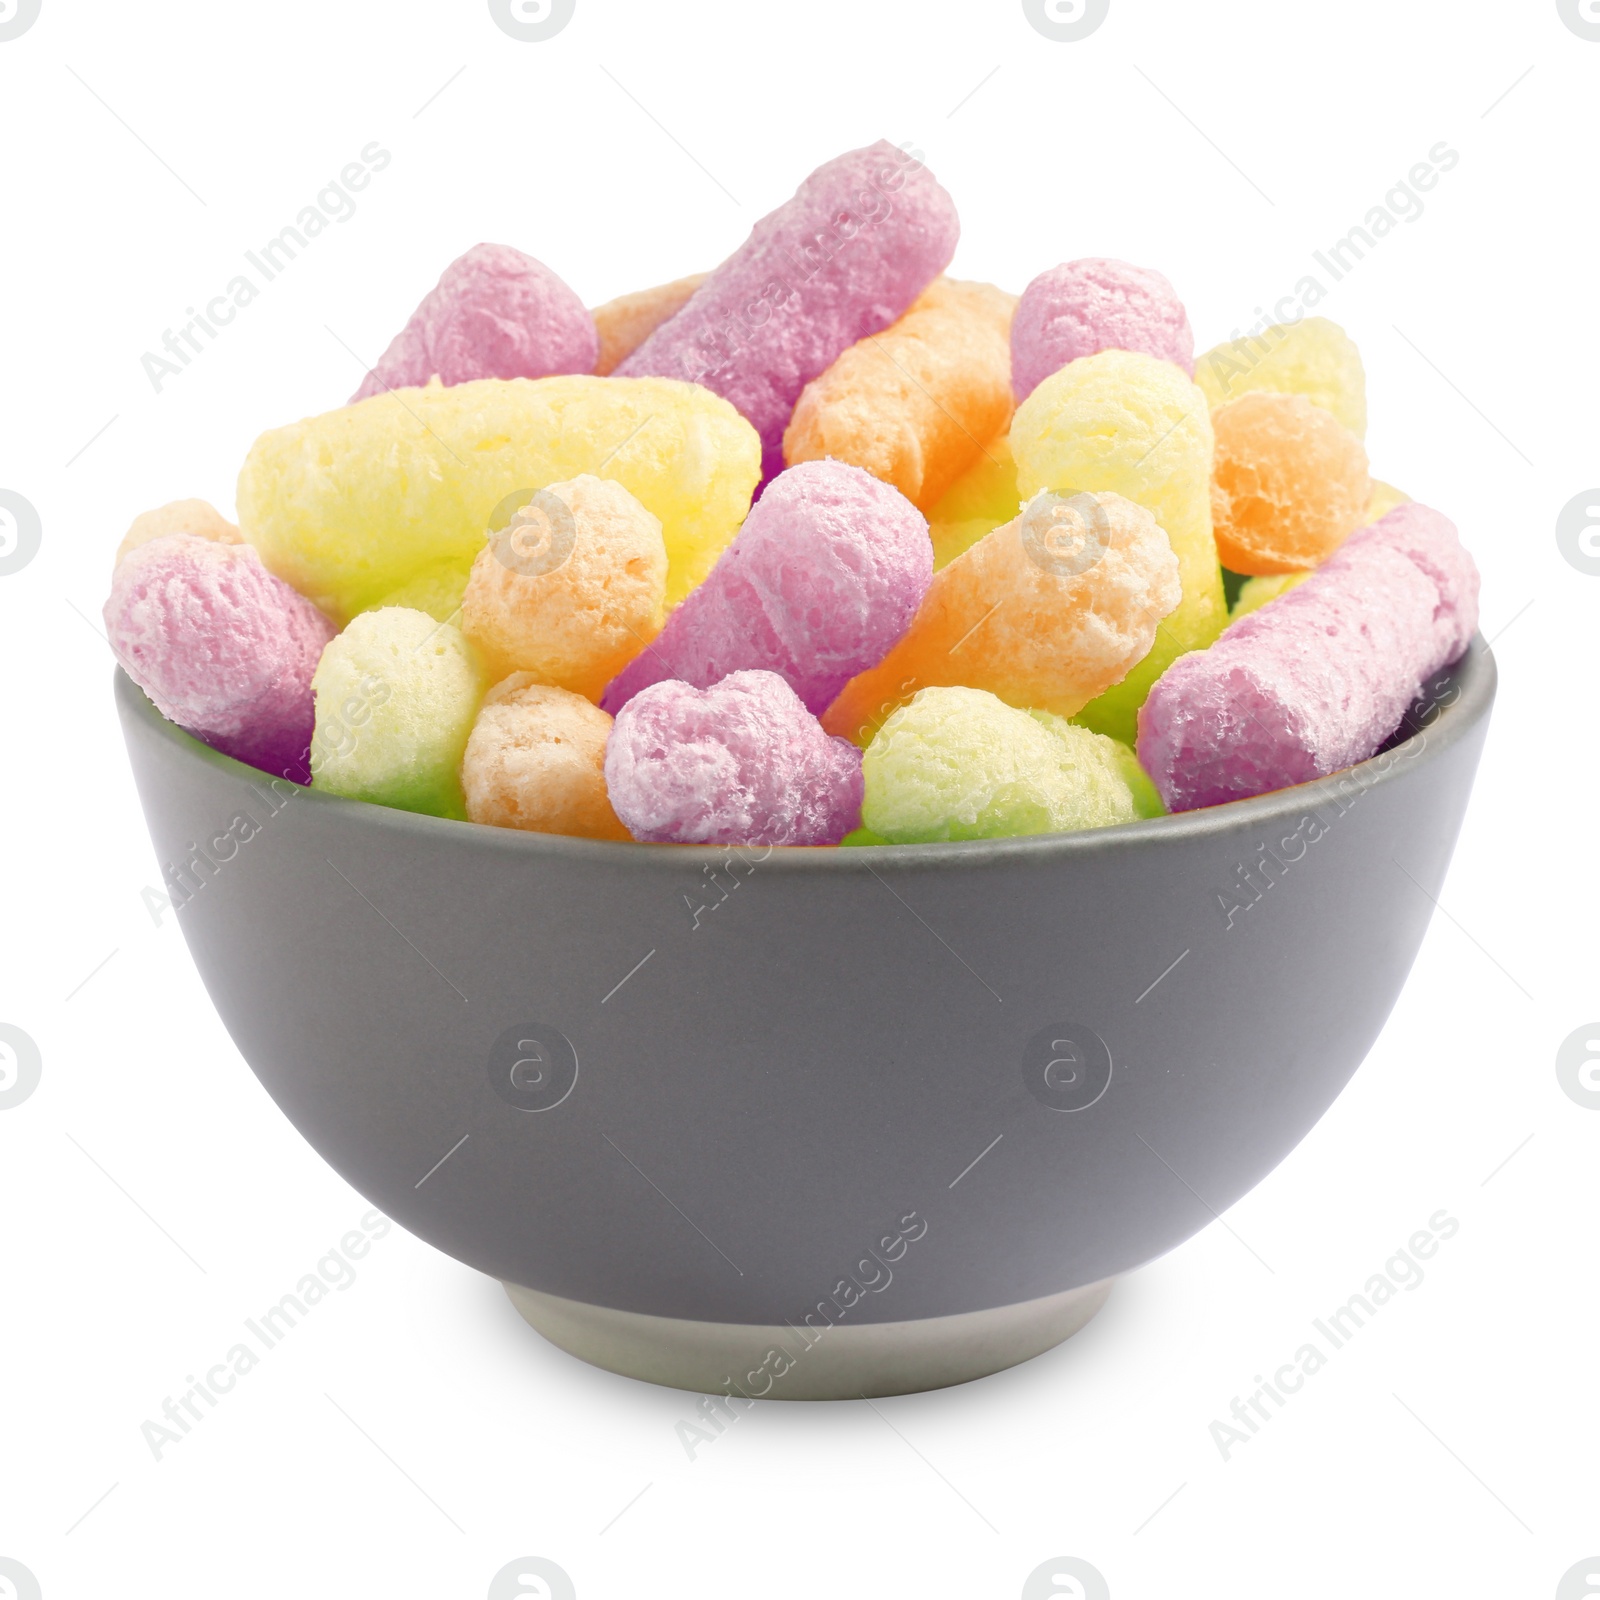 Image of Bowl with colorful corn puffs on white background